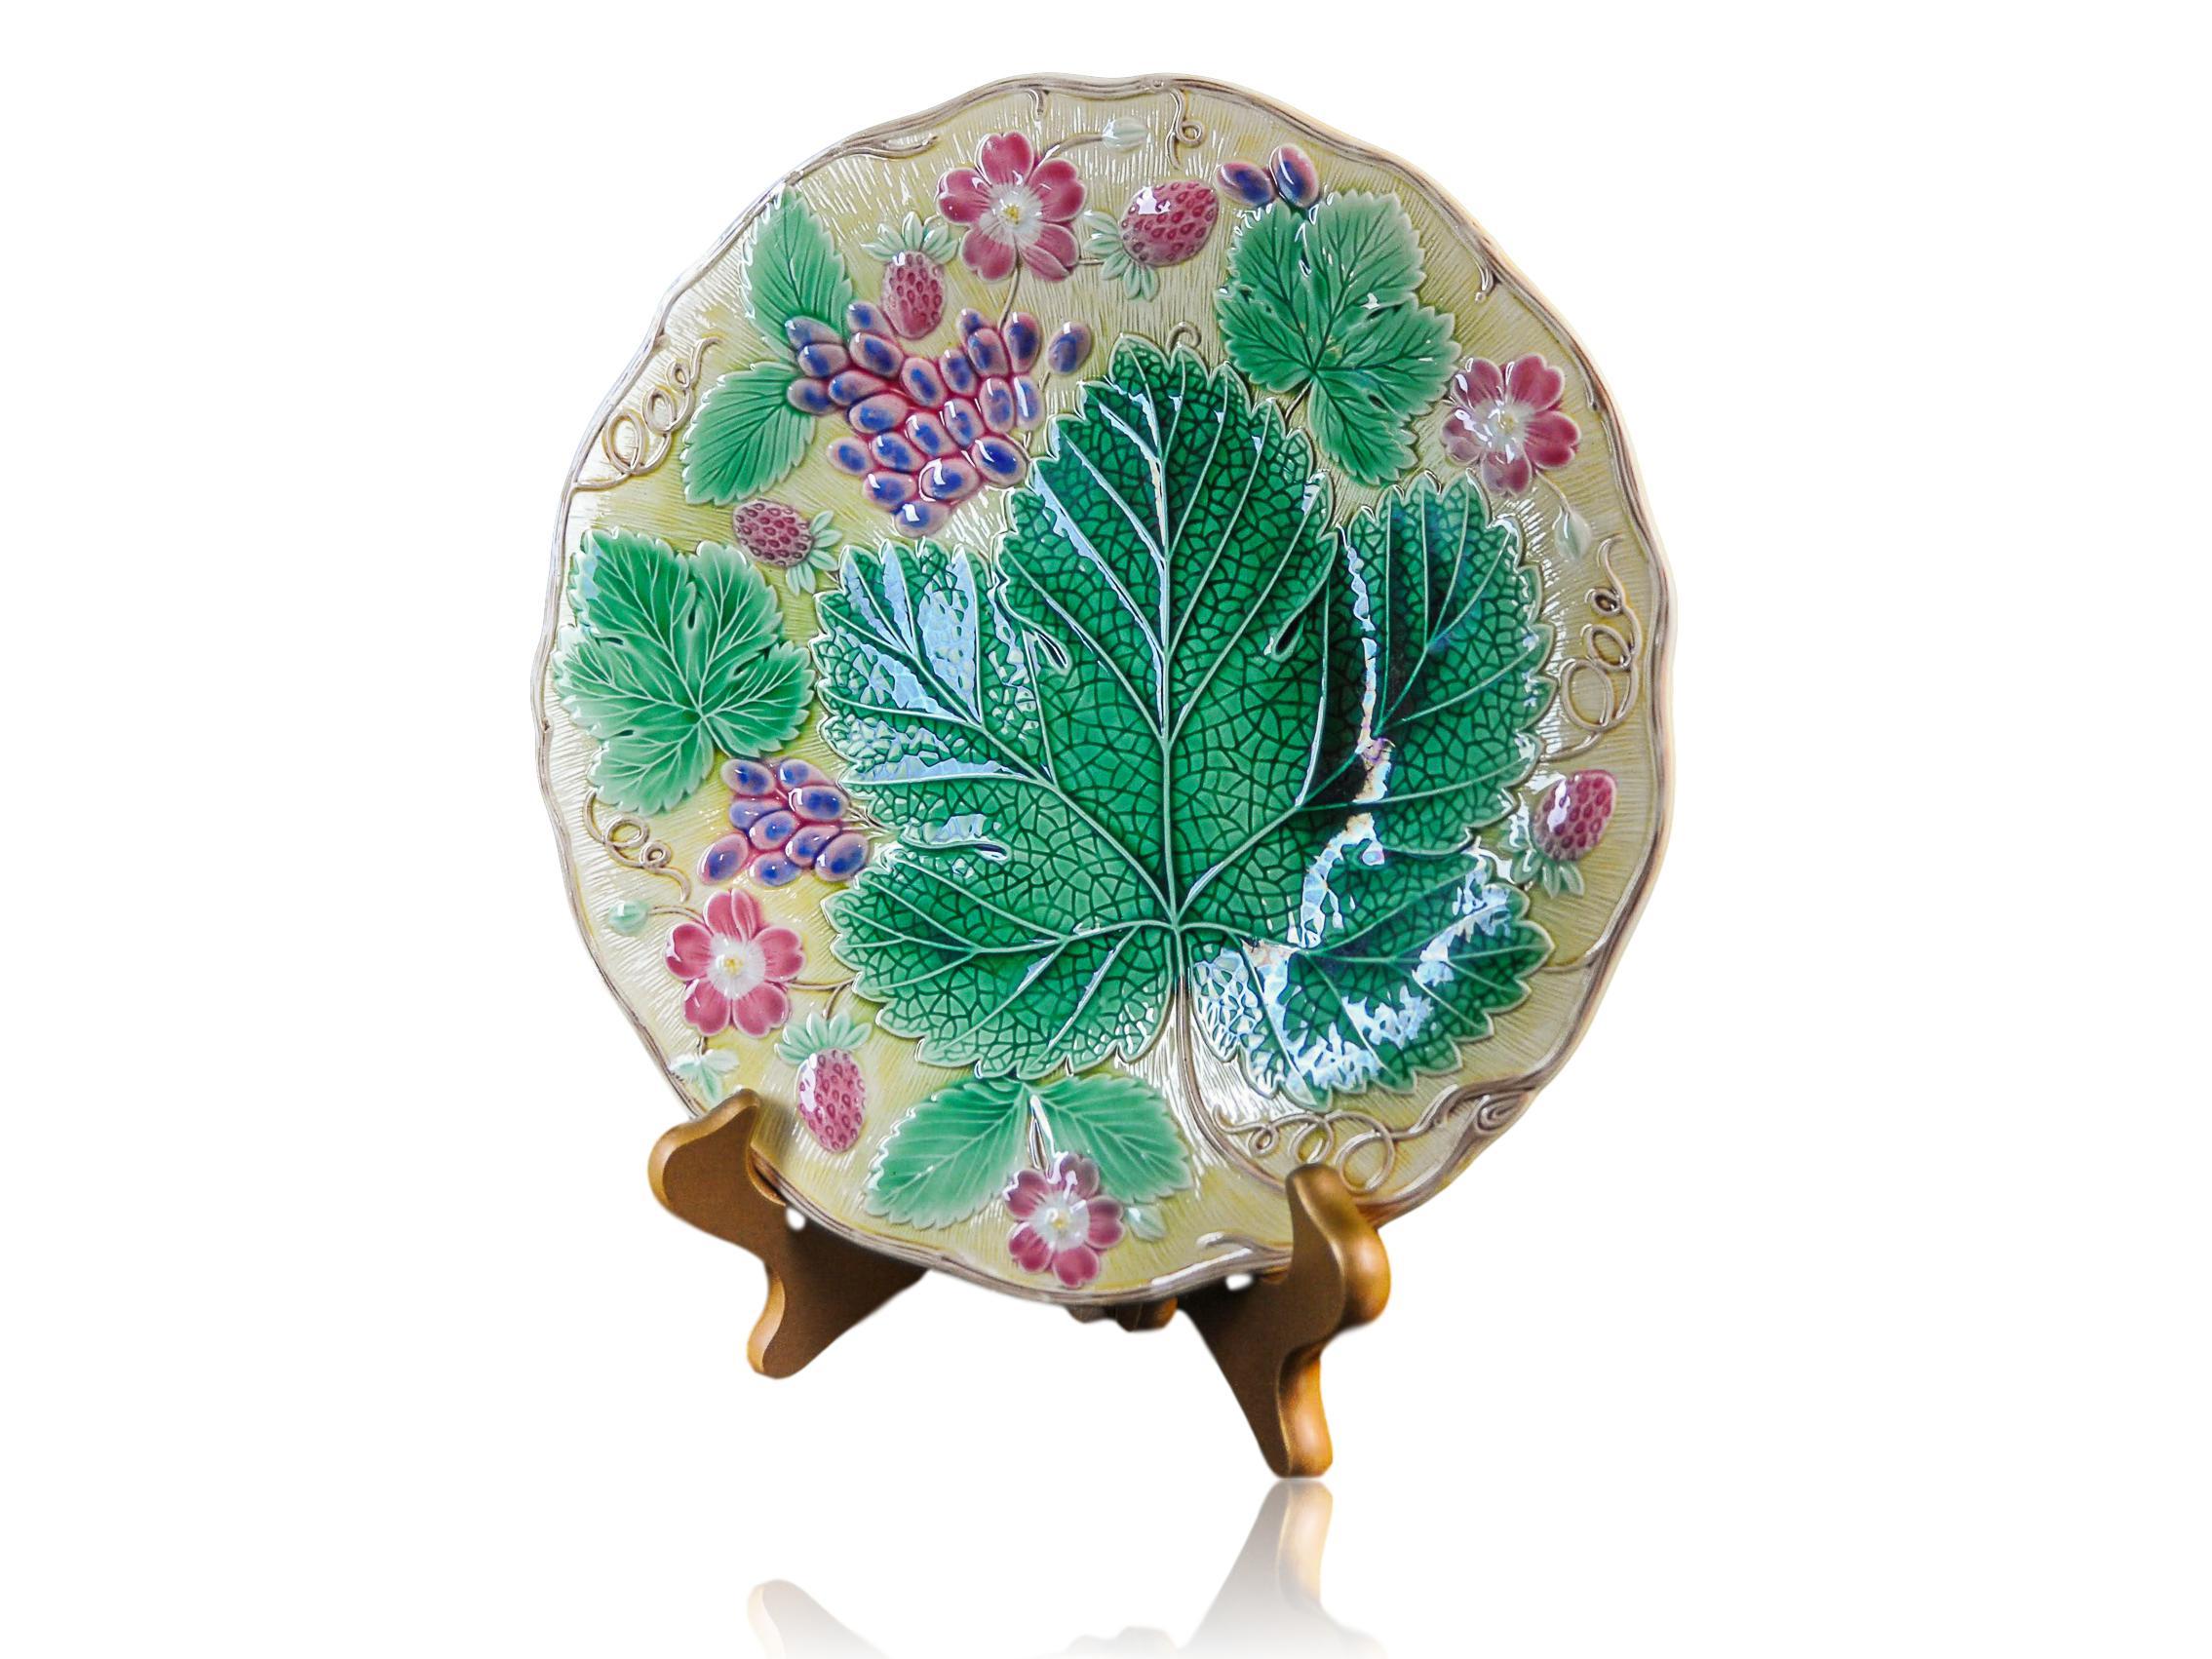 Wedgwood Majolica 'Vine & Strawberry' plate, English, dated 1929, 9-in diameter, with a large central green grape leaf, purple grapes, reddish pink strawberries and blossoms on a yellow ground. Impressed marks to reverse: 'WEDGWOOD' 'MADE IN